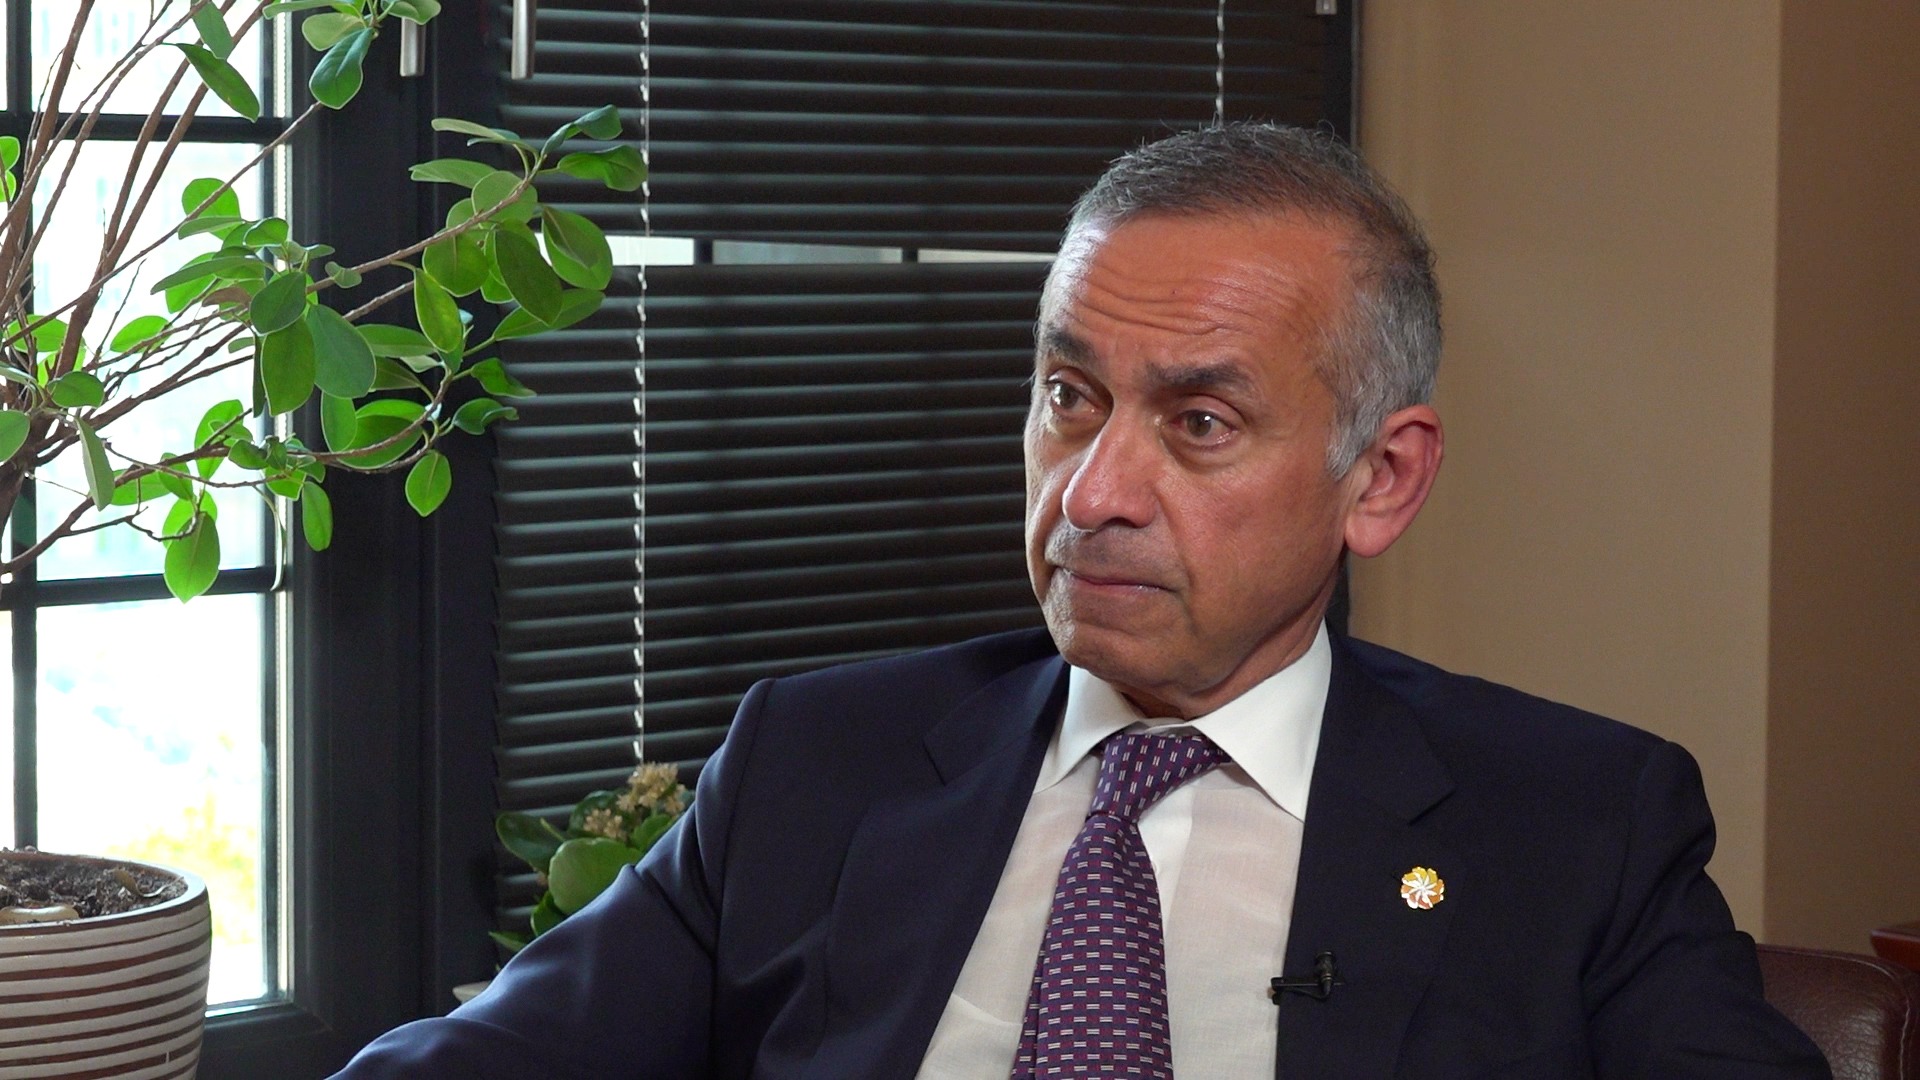 Remembering Genocide is the Only Way to Prevent Genocide – A Talk with Lord Darzi